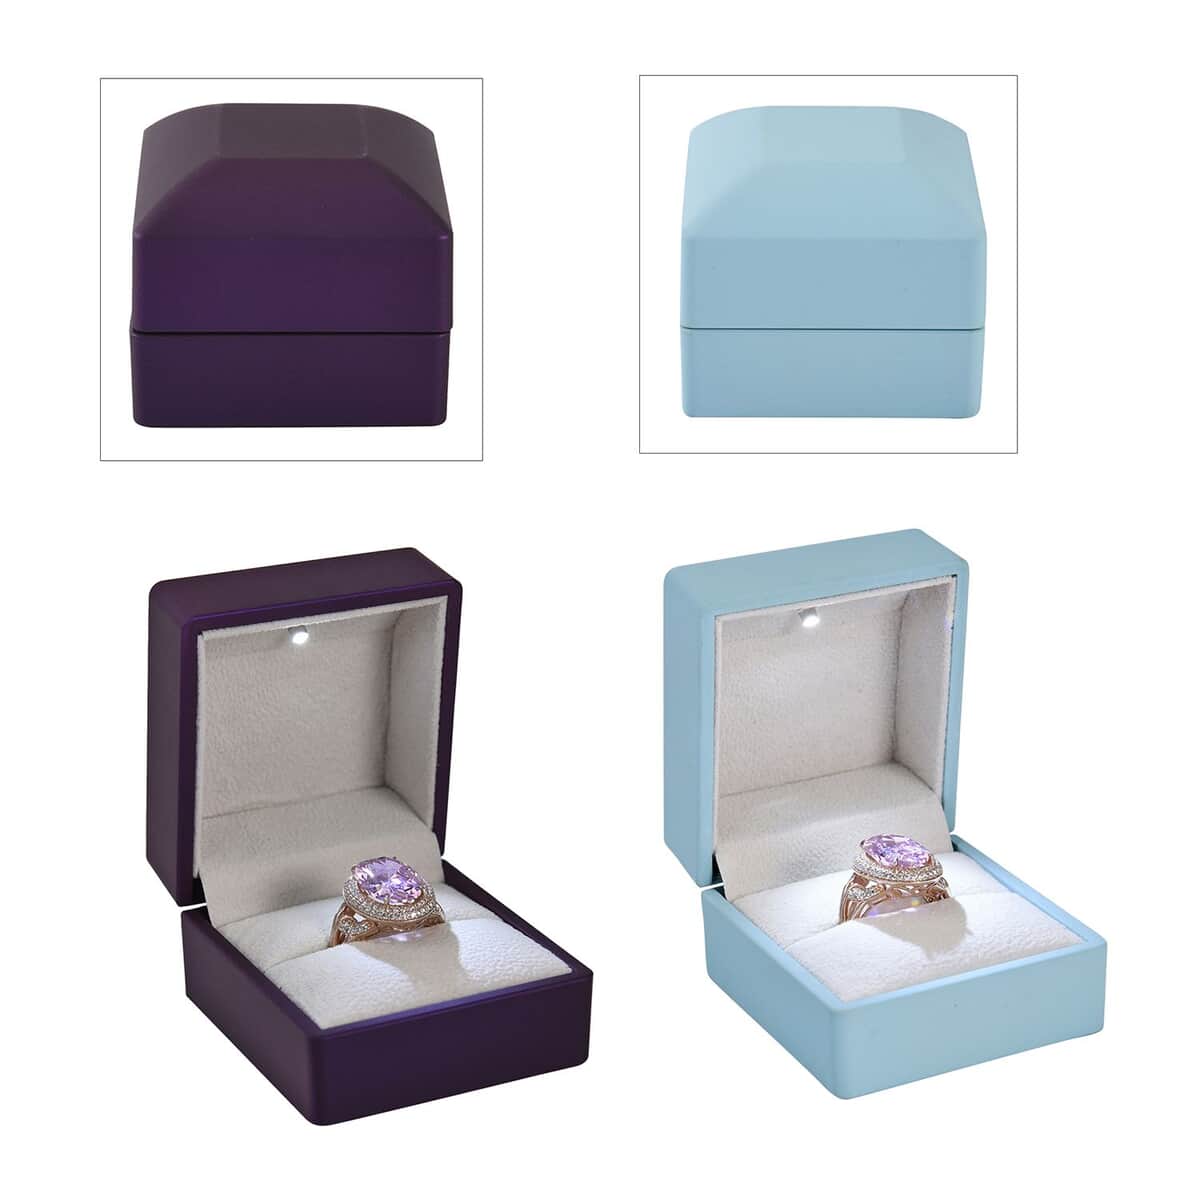 Set of 2 Sky Teal & Purple Solid Polish LED Light Ring Box (Can Hold up to 2 Rings) image number 0